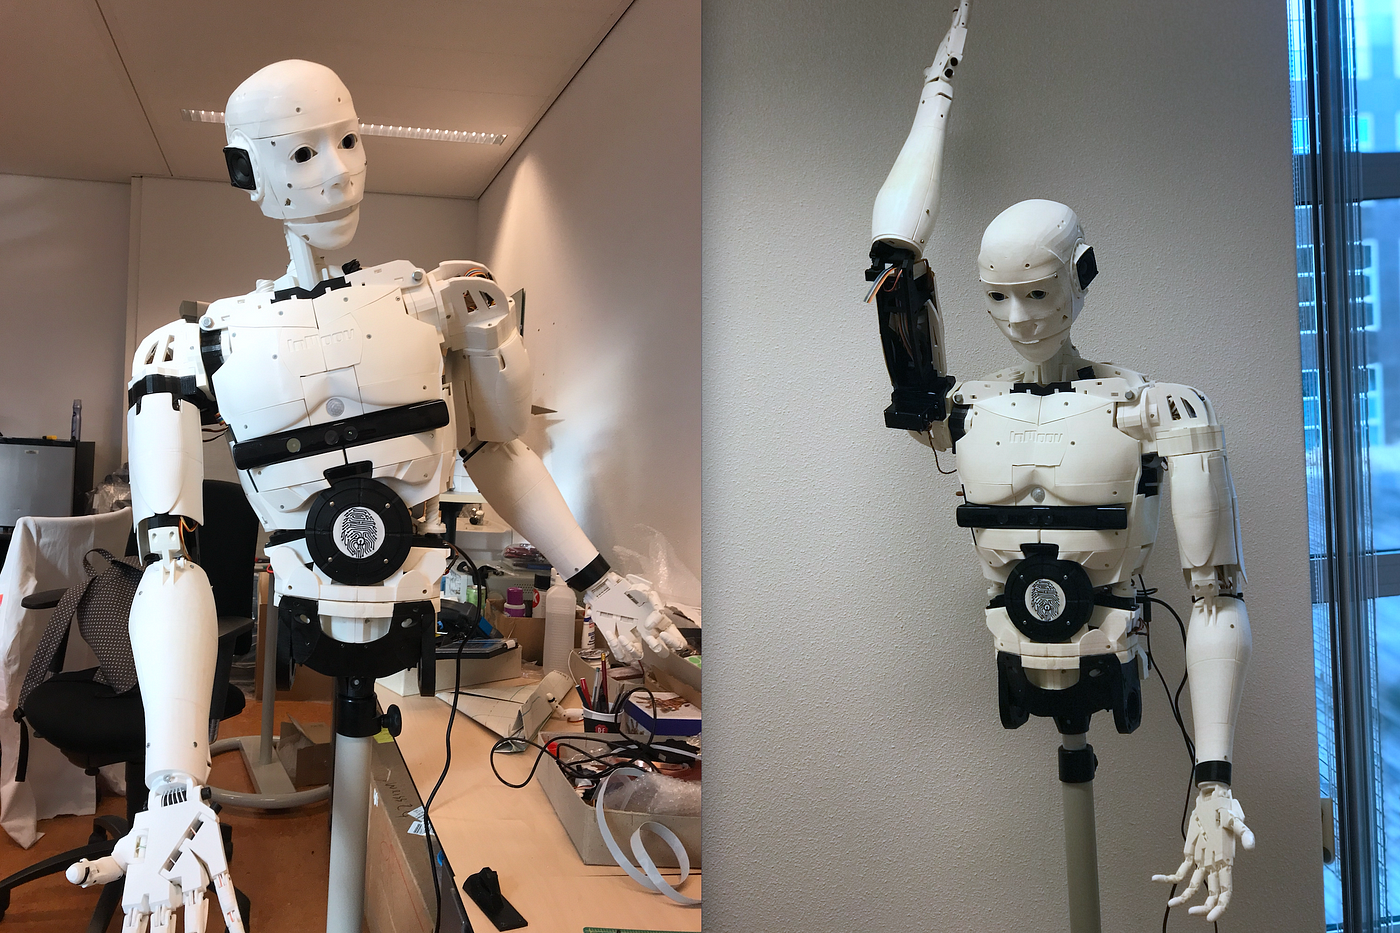 Say Hello to Jinn, our InMoov Robot | by Emerging technologies & challenges  | Medium